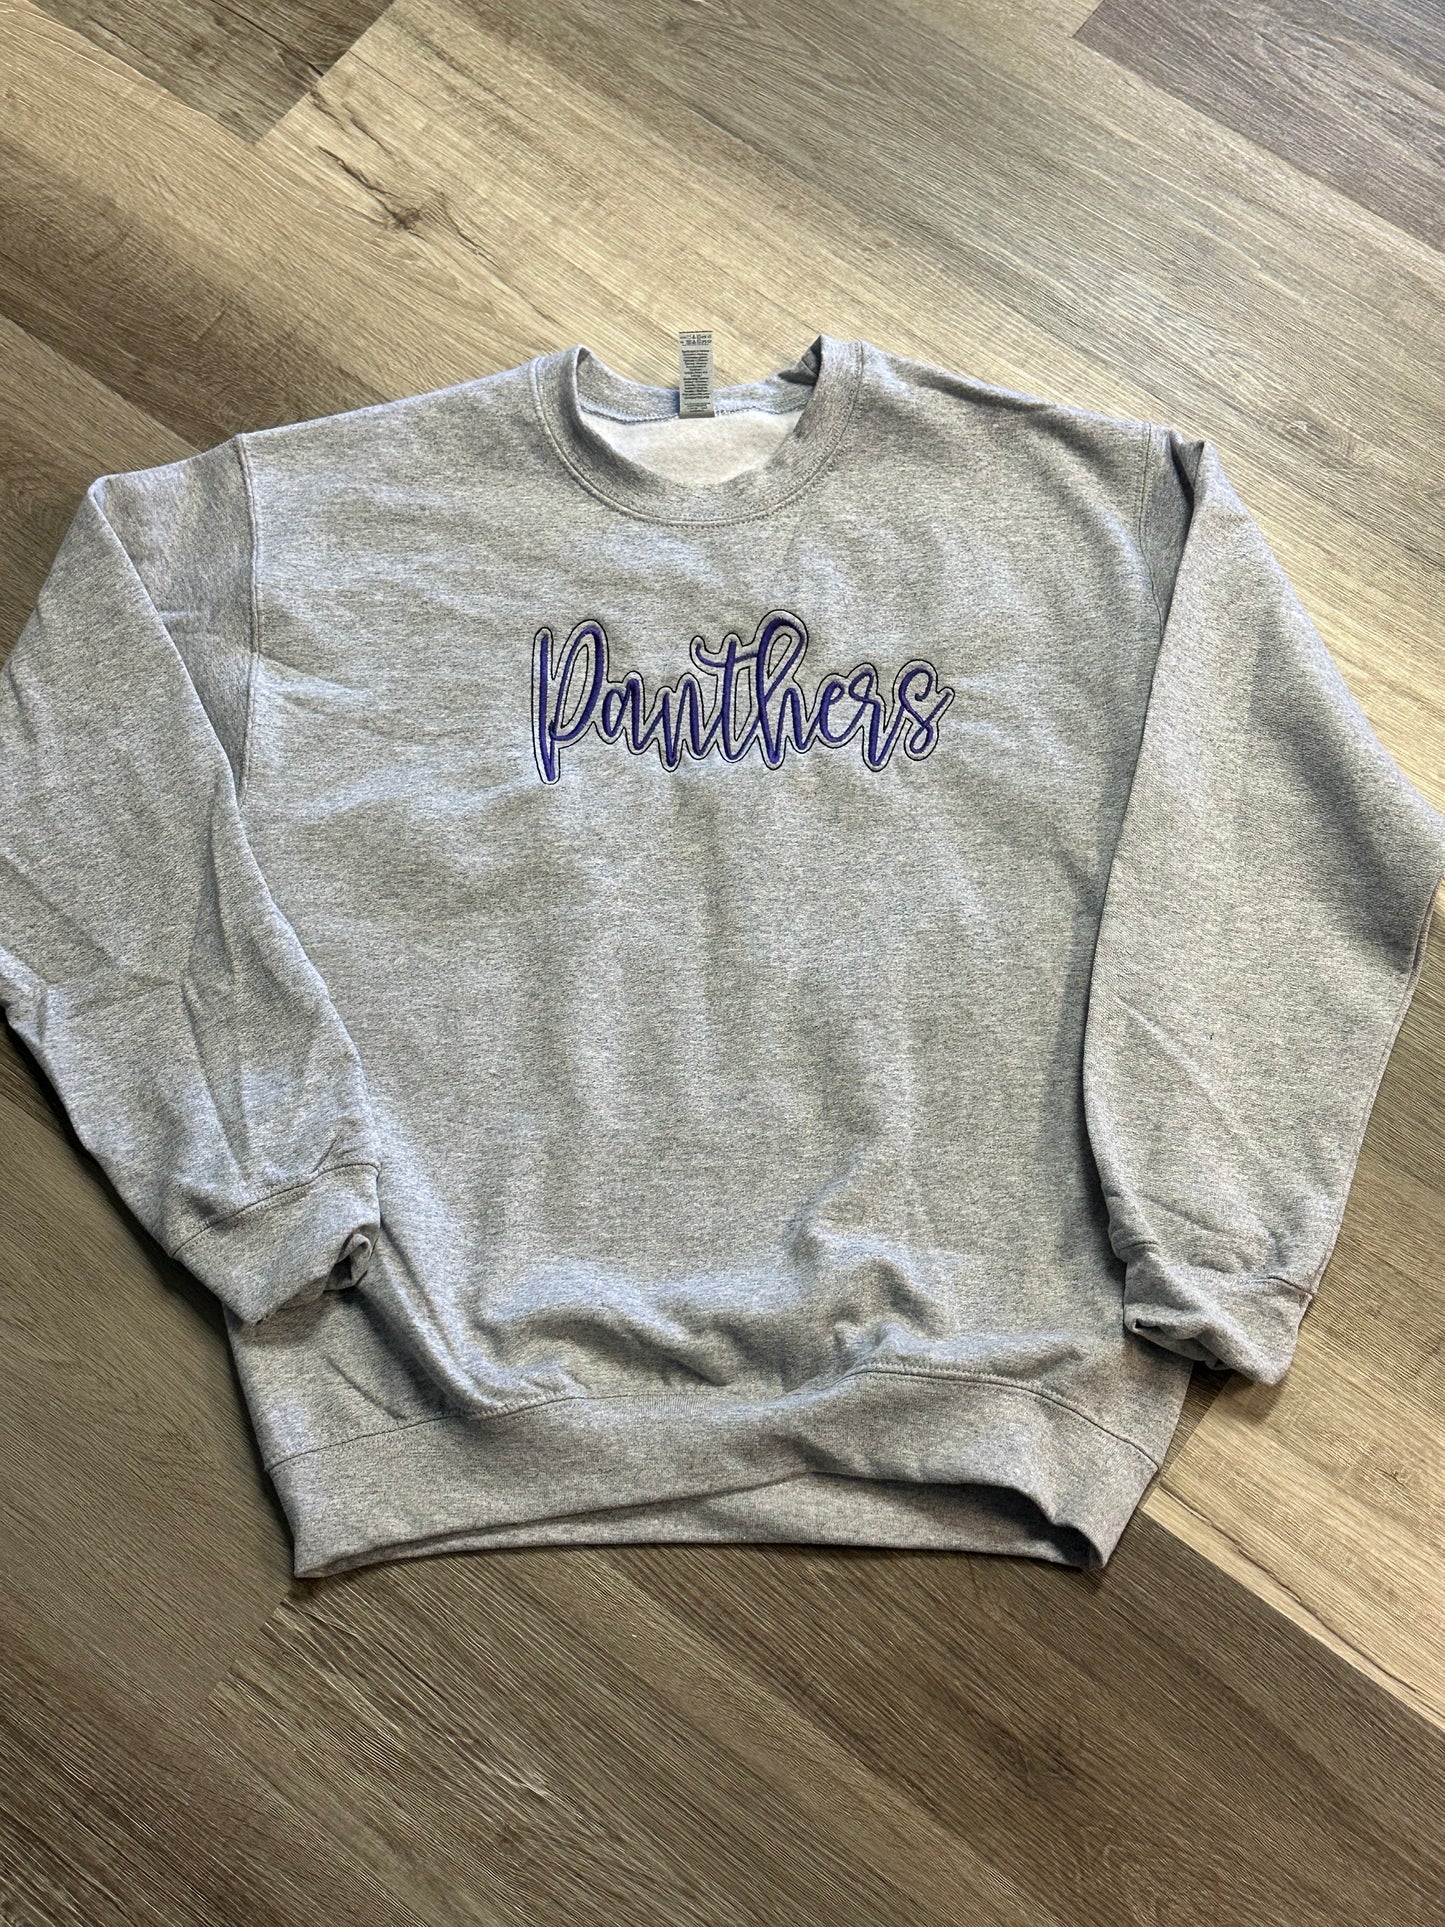 Panthers Embroidered Sweatshirt